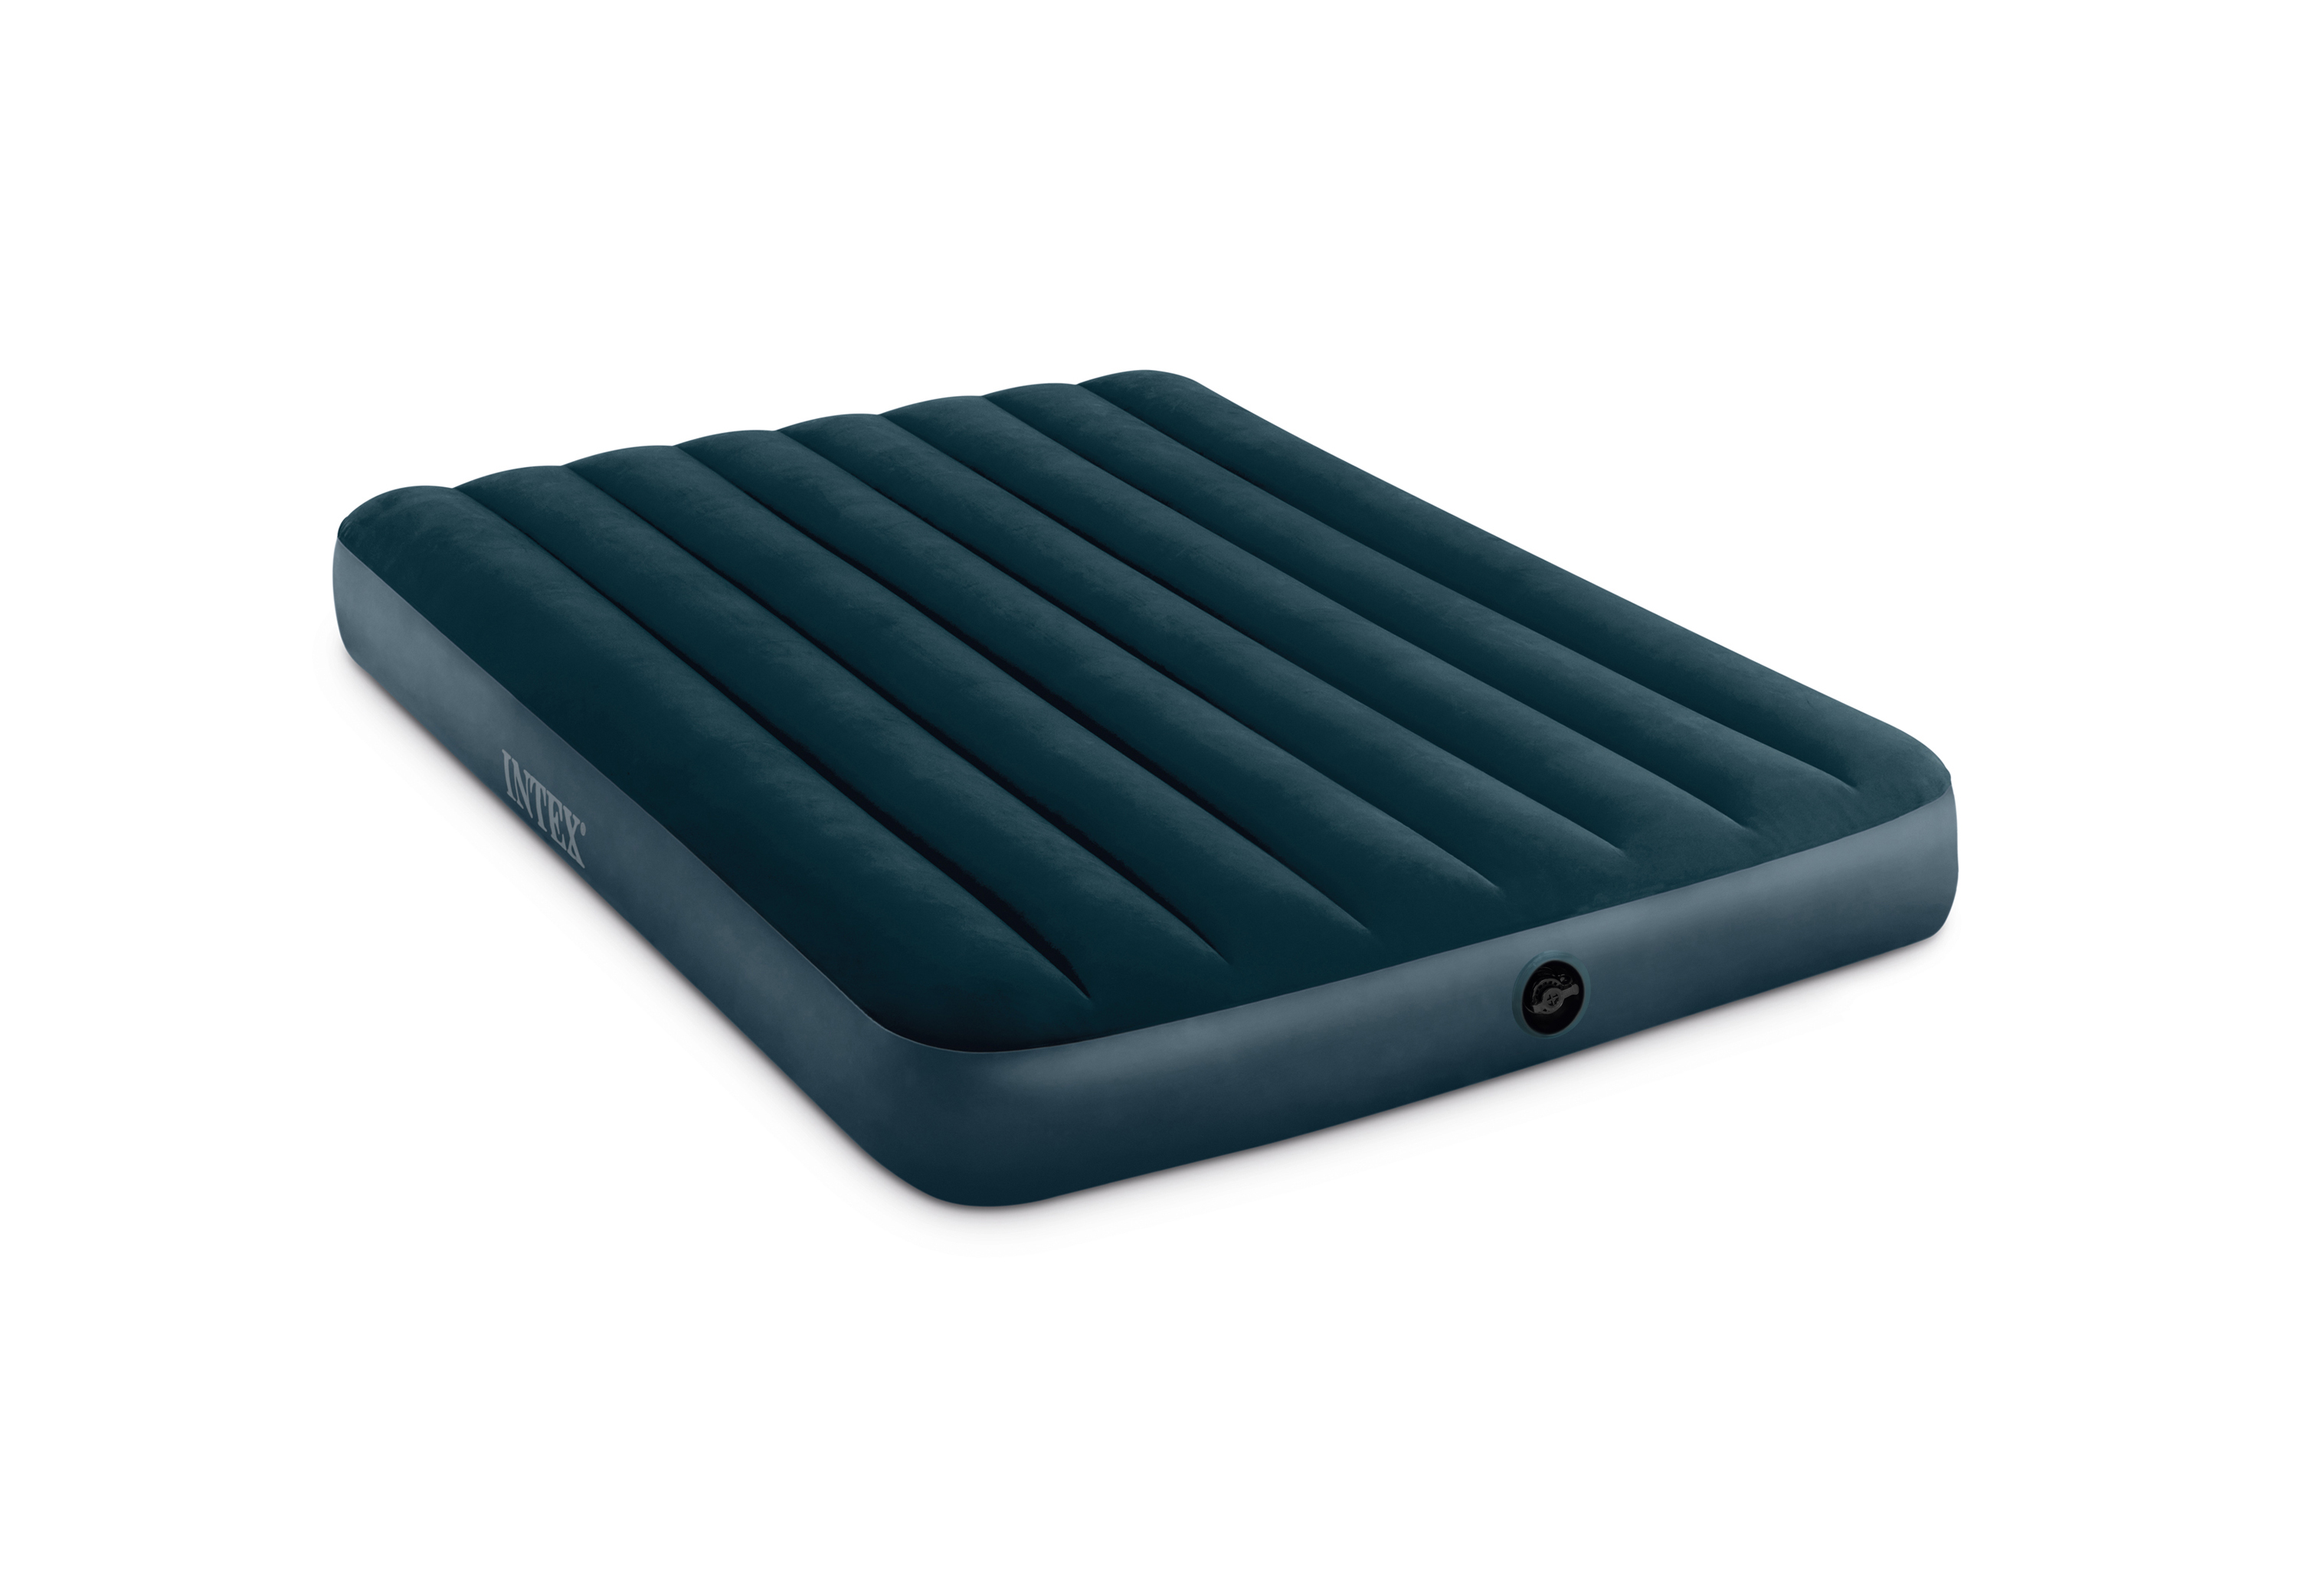 Intex 10" Standard Dura-Beam Airbed Mattress - Pump Not Included - FULL - image 1 of 10